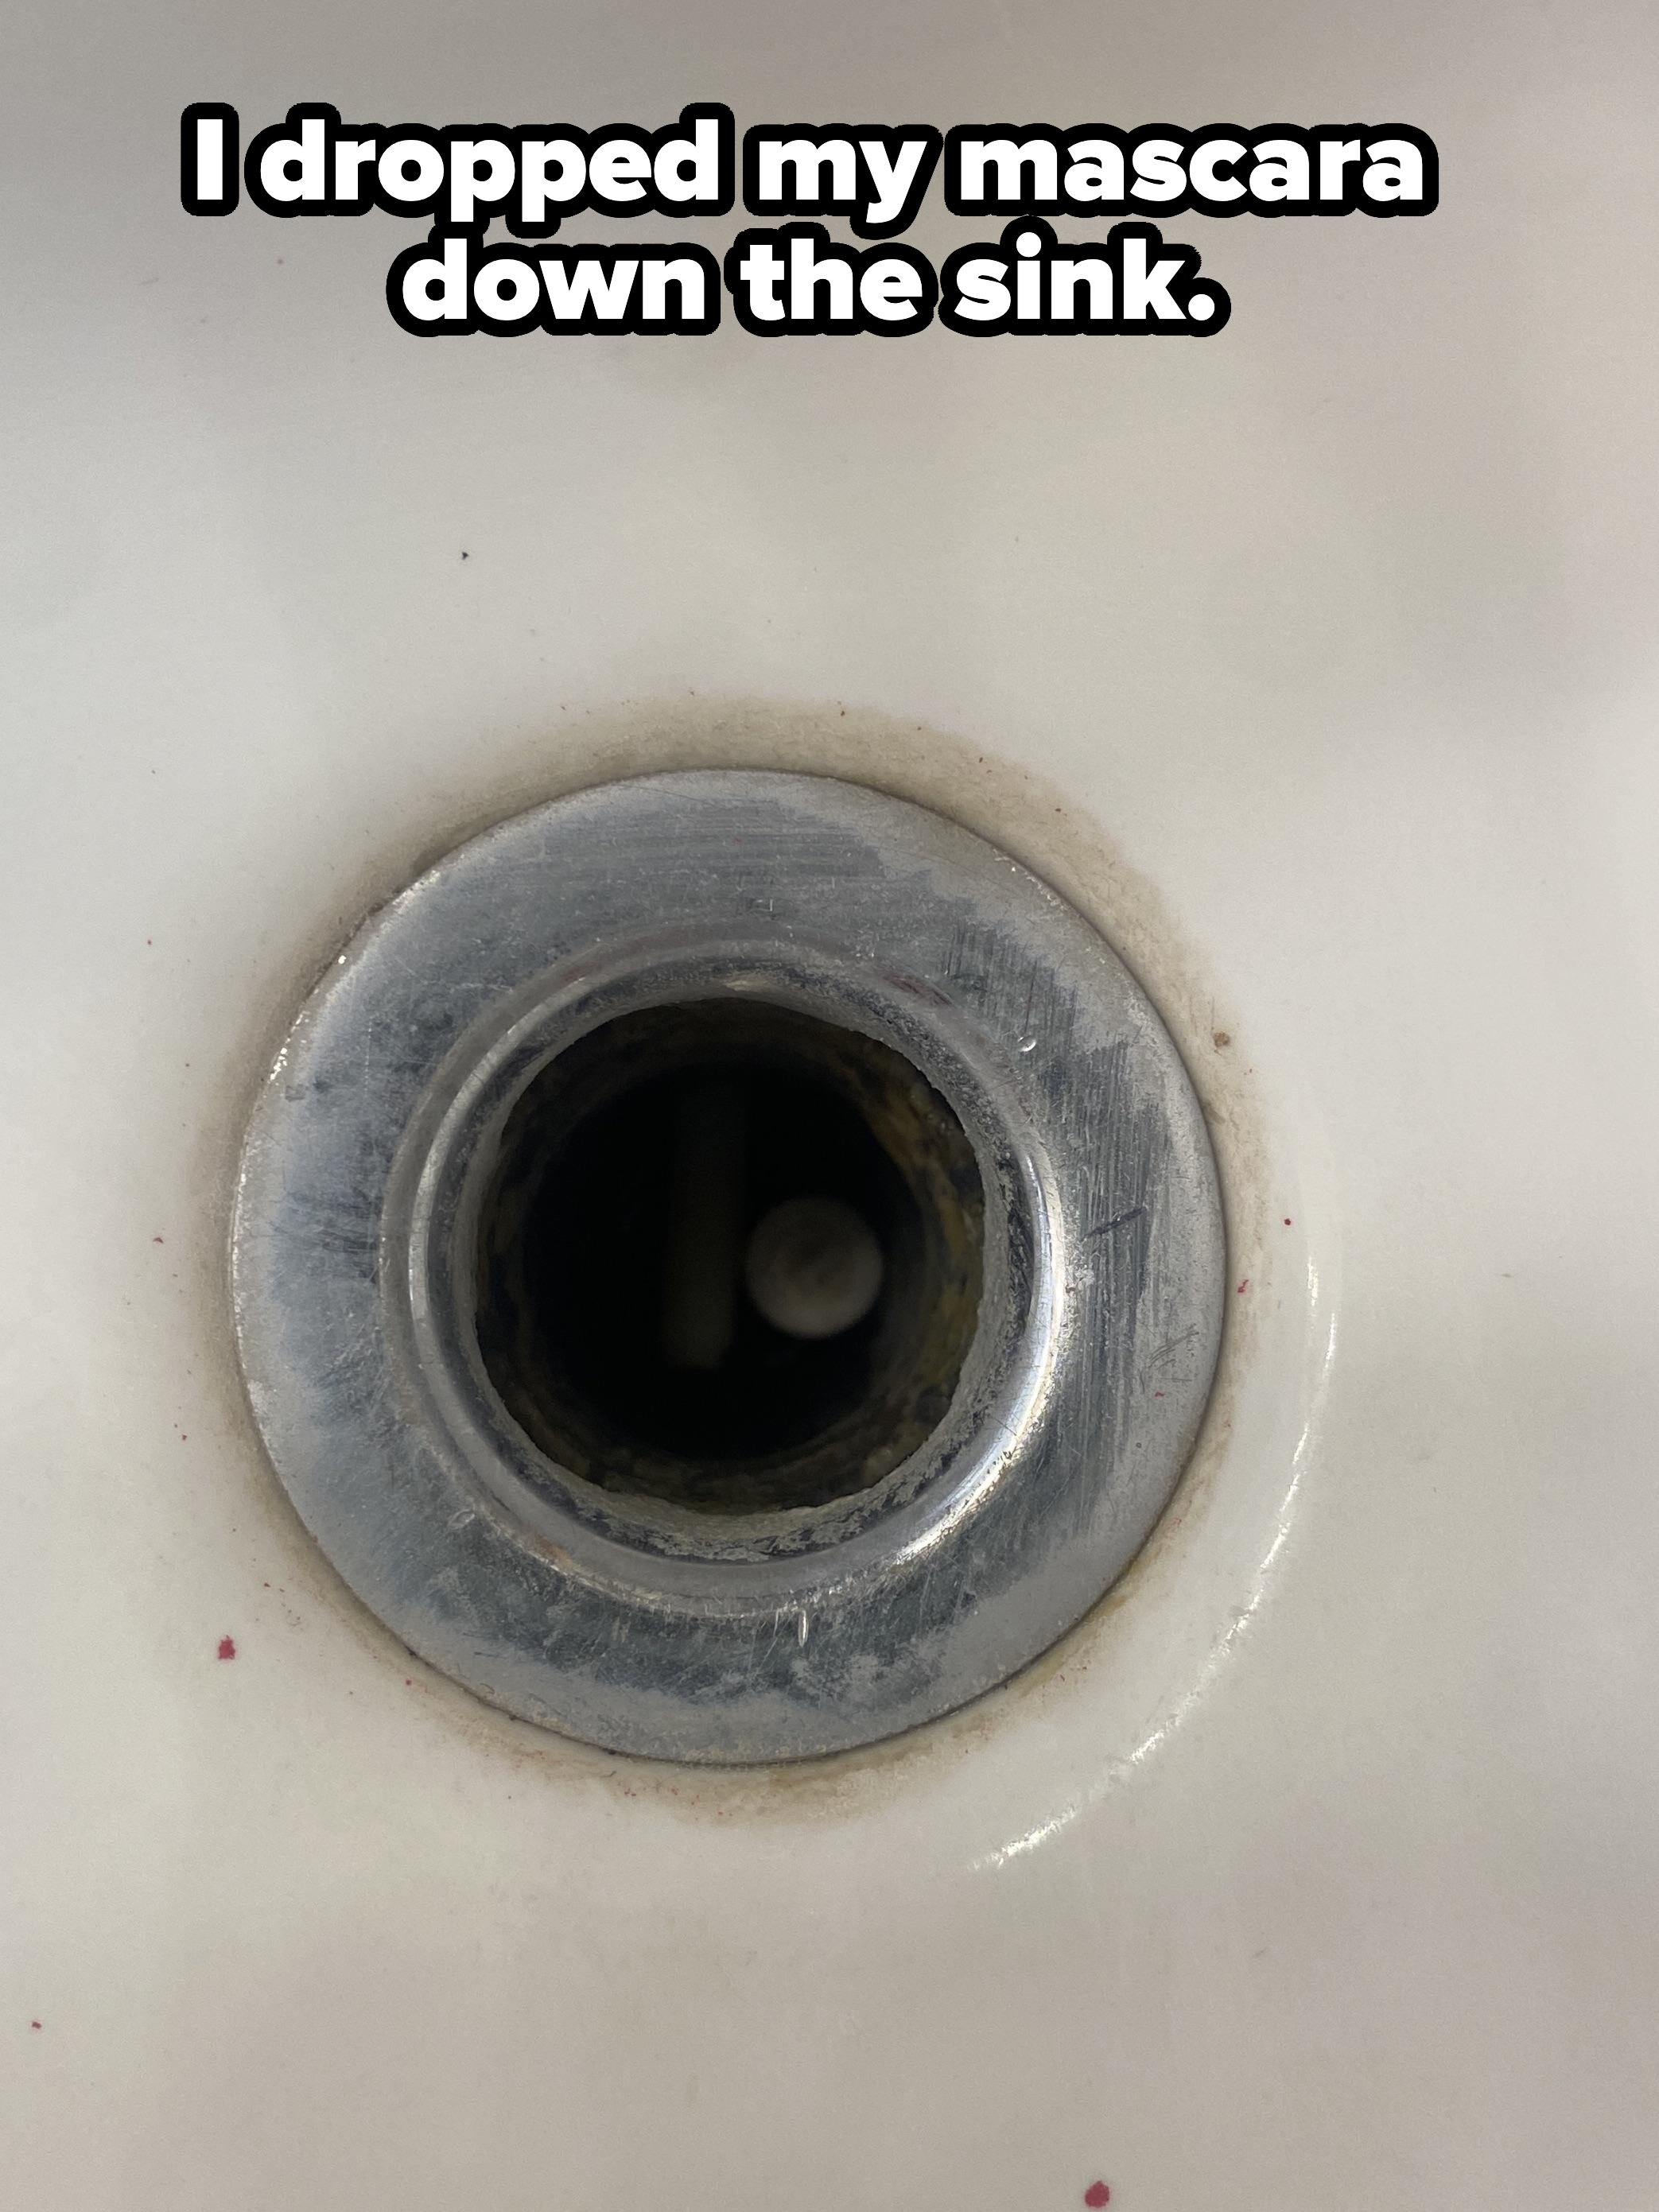 Close-up of a sink drain with a tube of mascara barely visible at the bottom